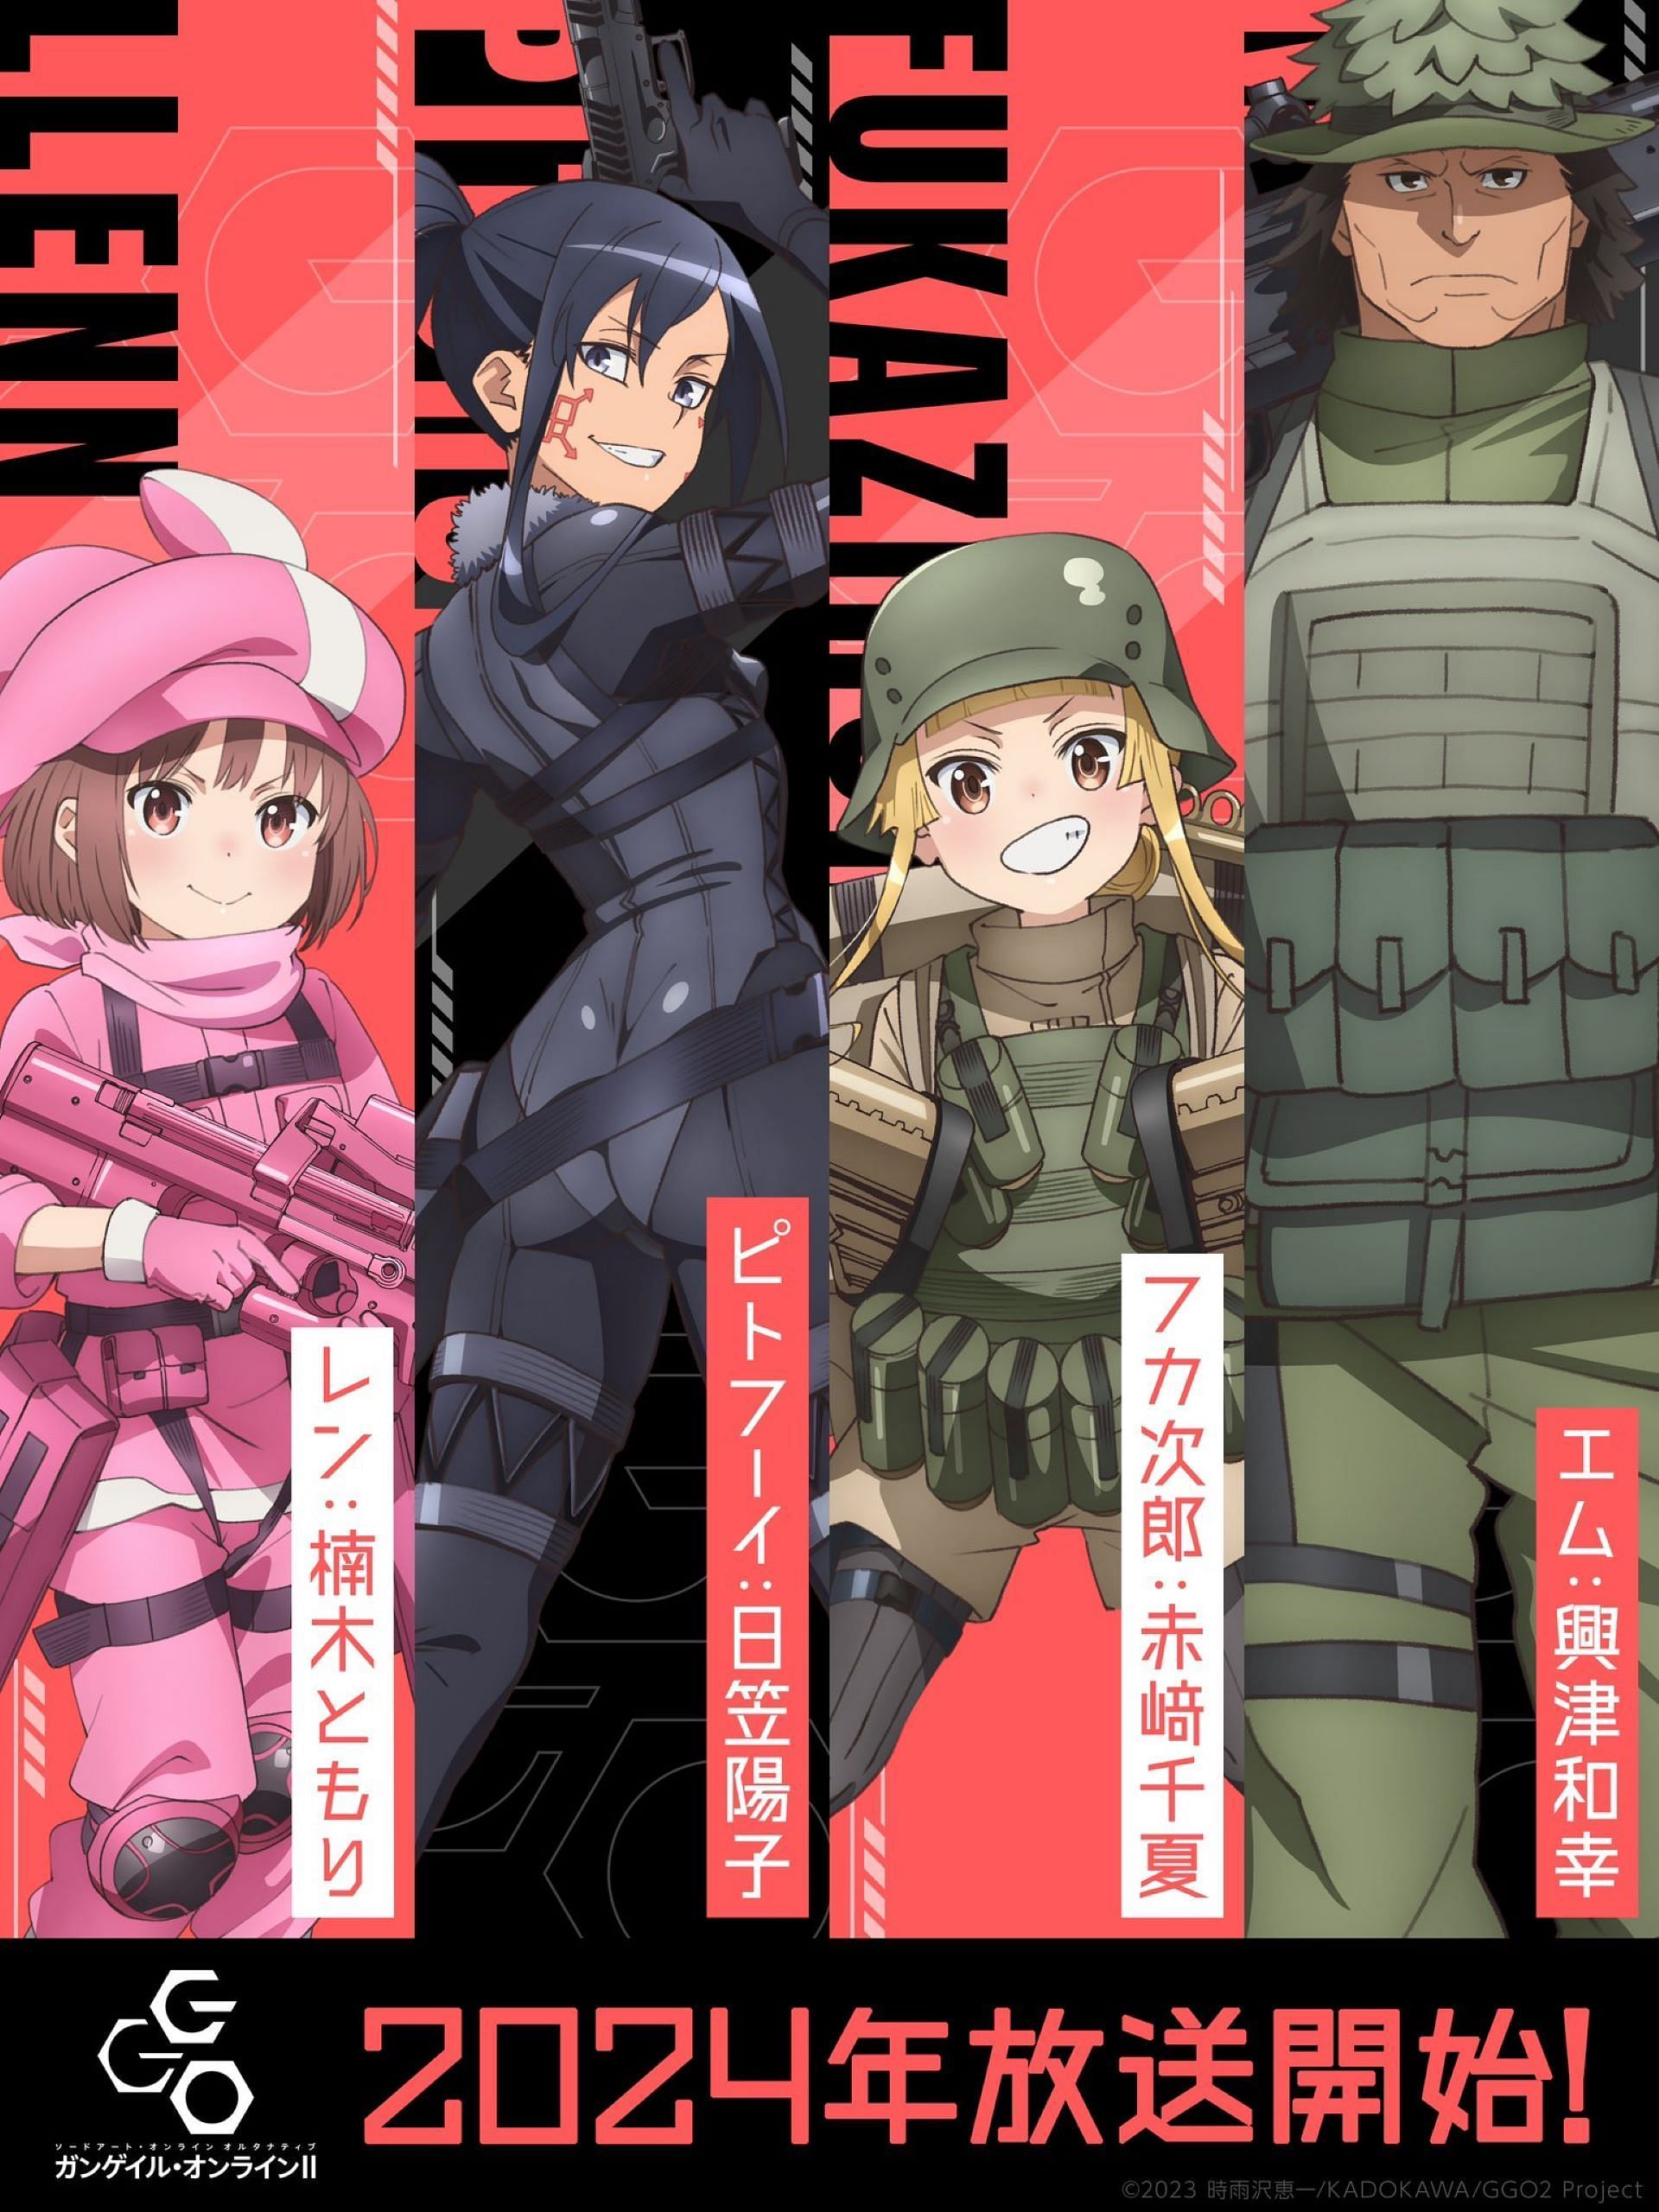 Character visuals for the anime (Image via Studio 3Hz)